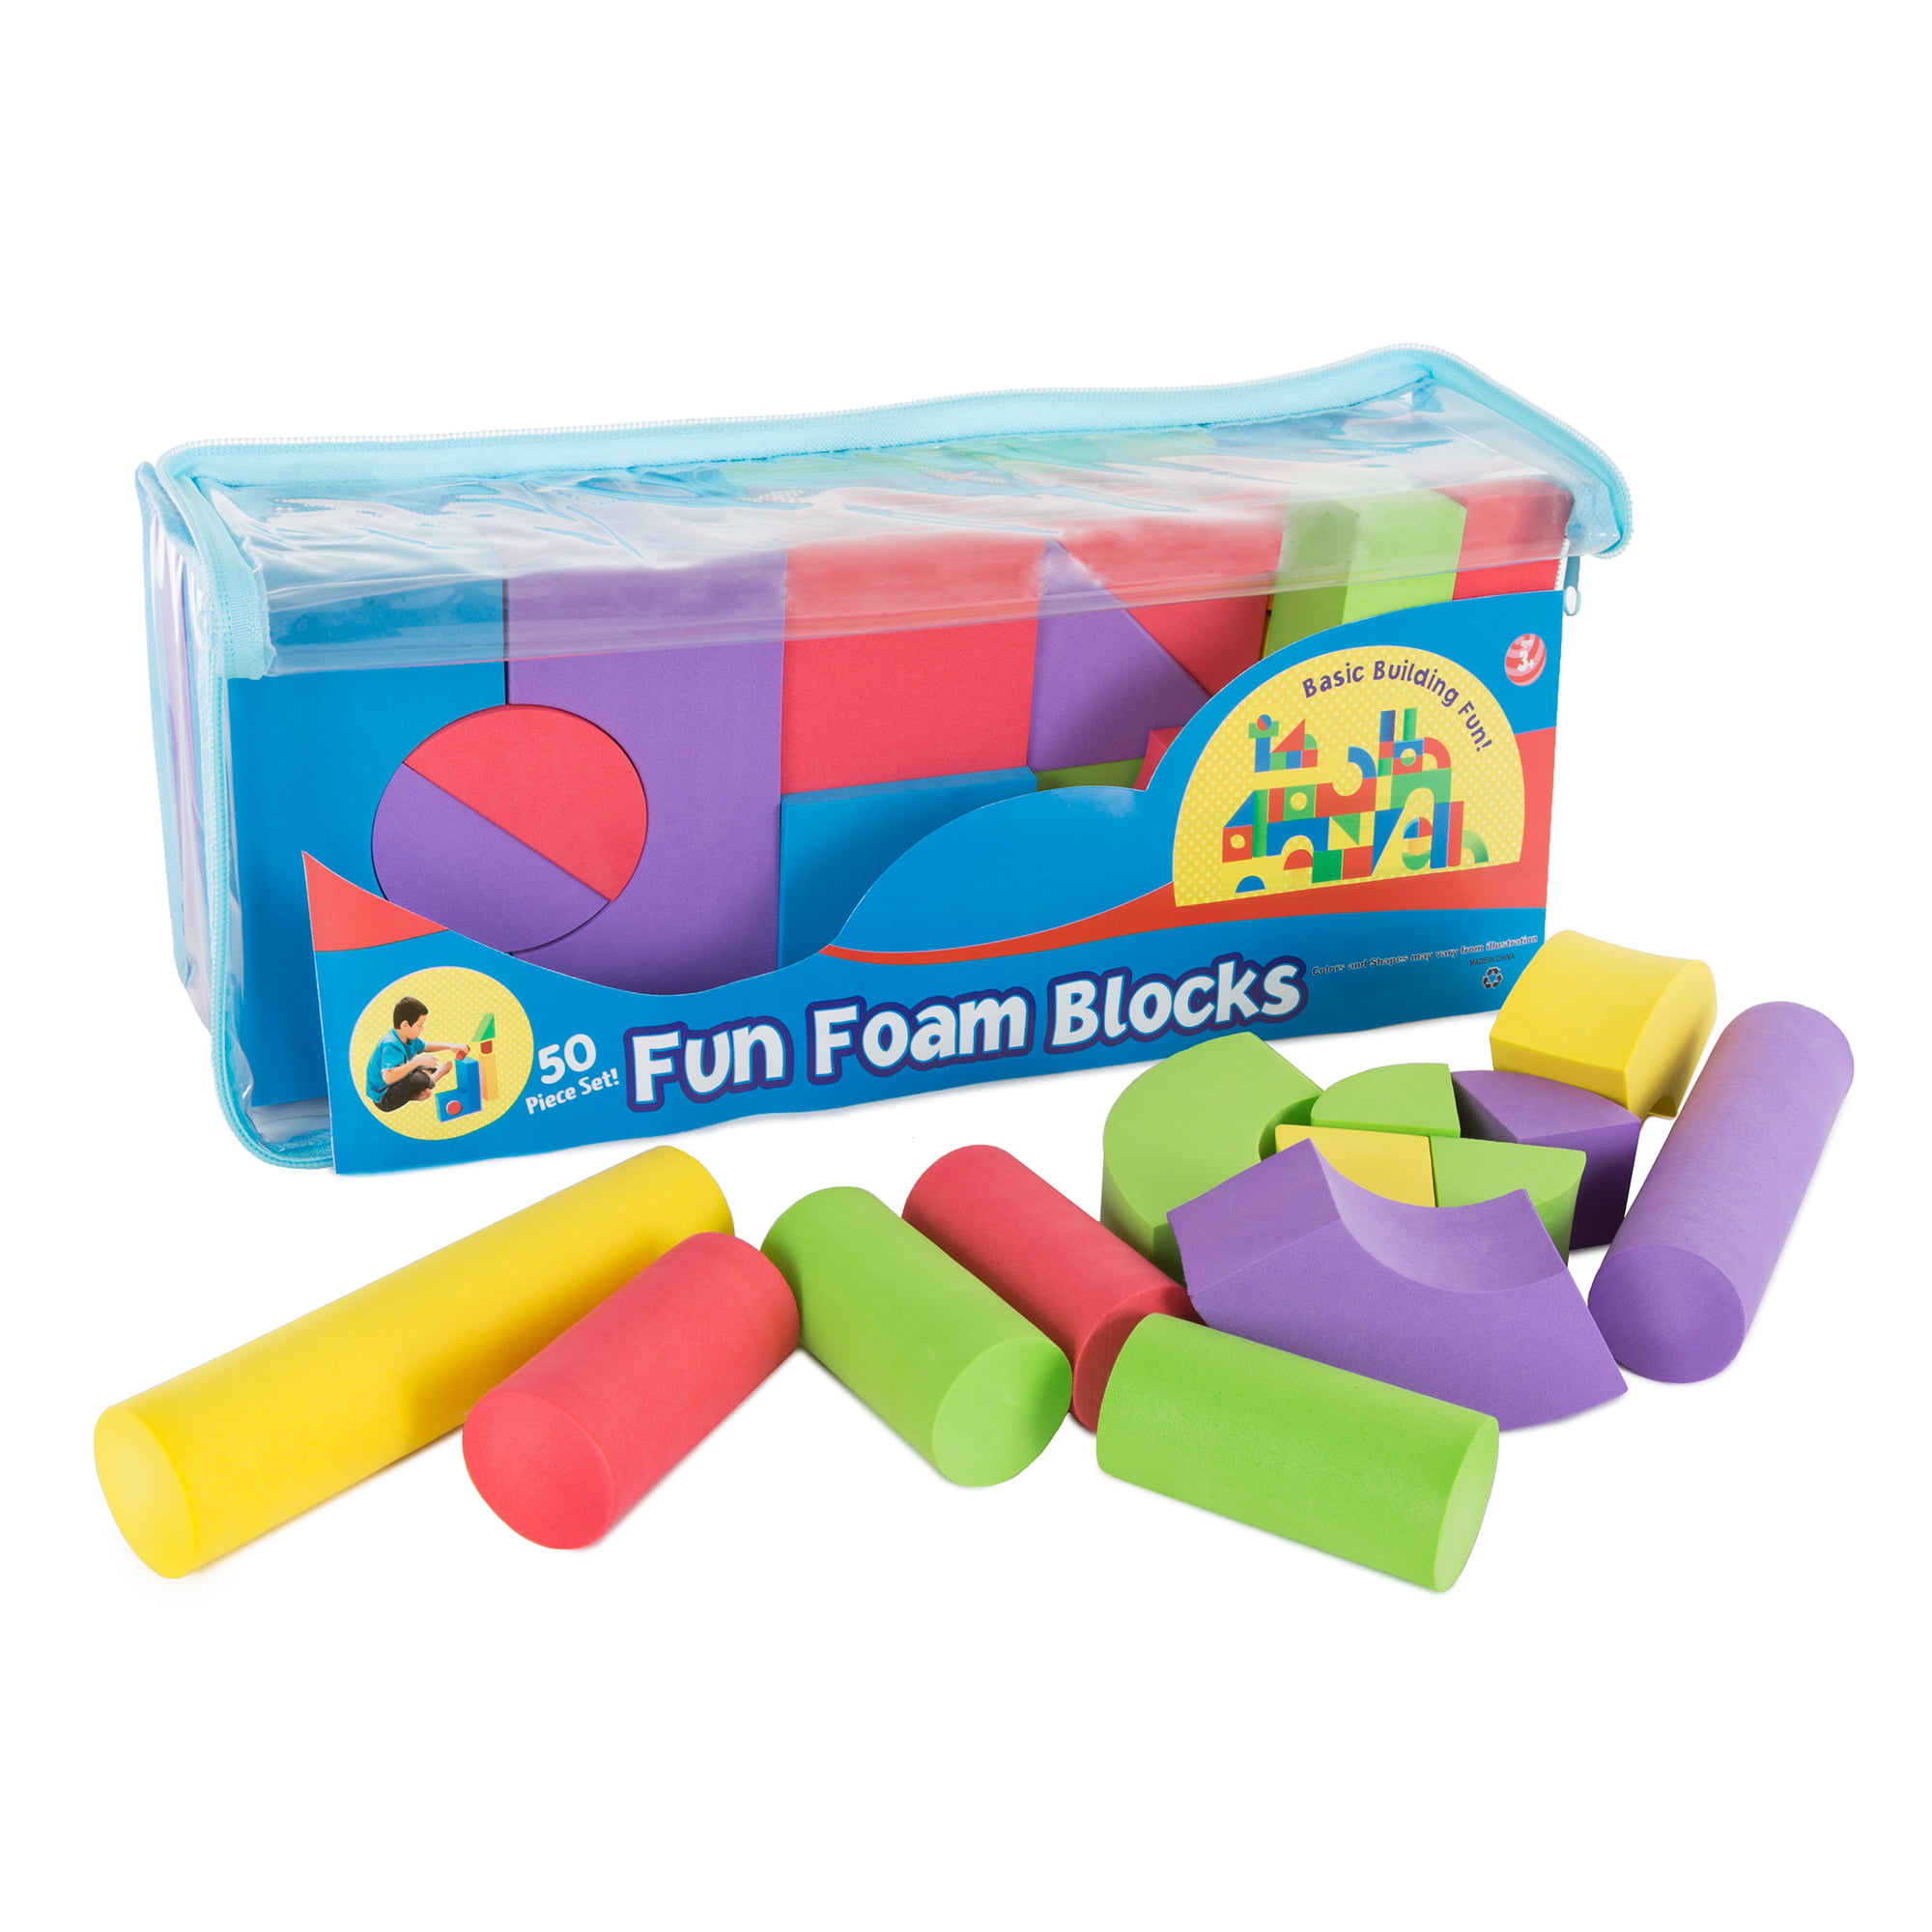 Kids Foam Building Blocks – Stacking Toys for Children Nontoxic EVA Shapes  Creative Design Quiet Time Play Educational Sensory Toy by Hey! Play!